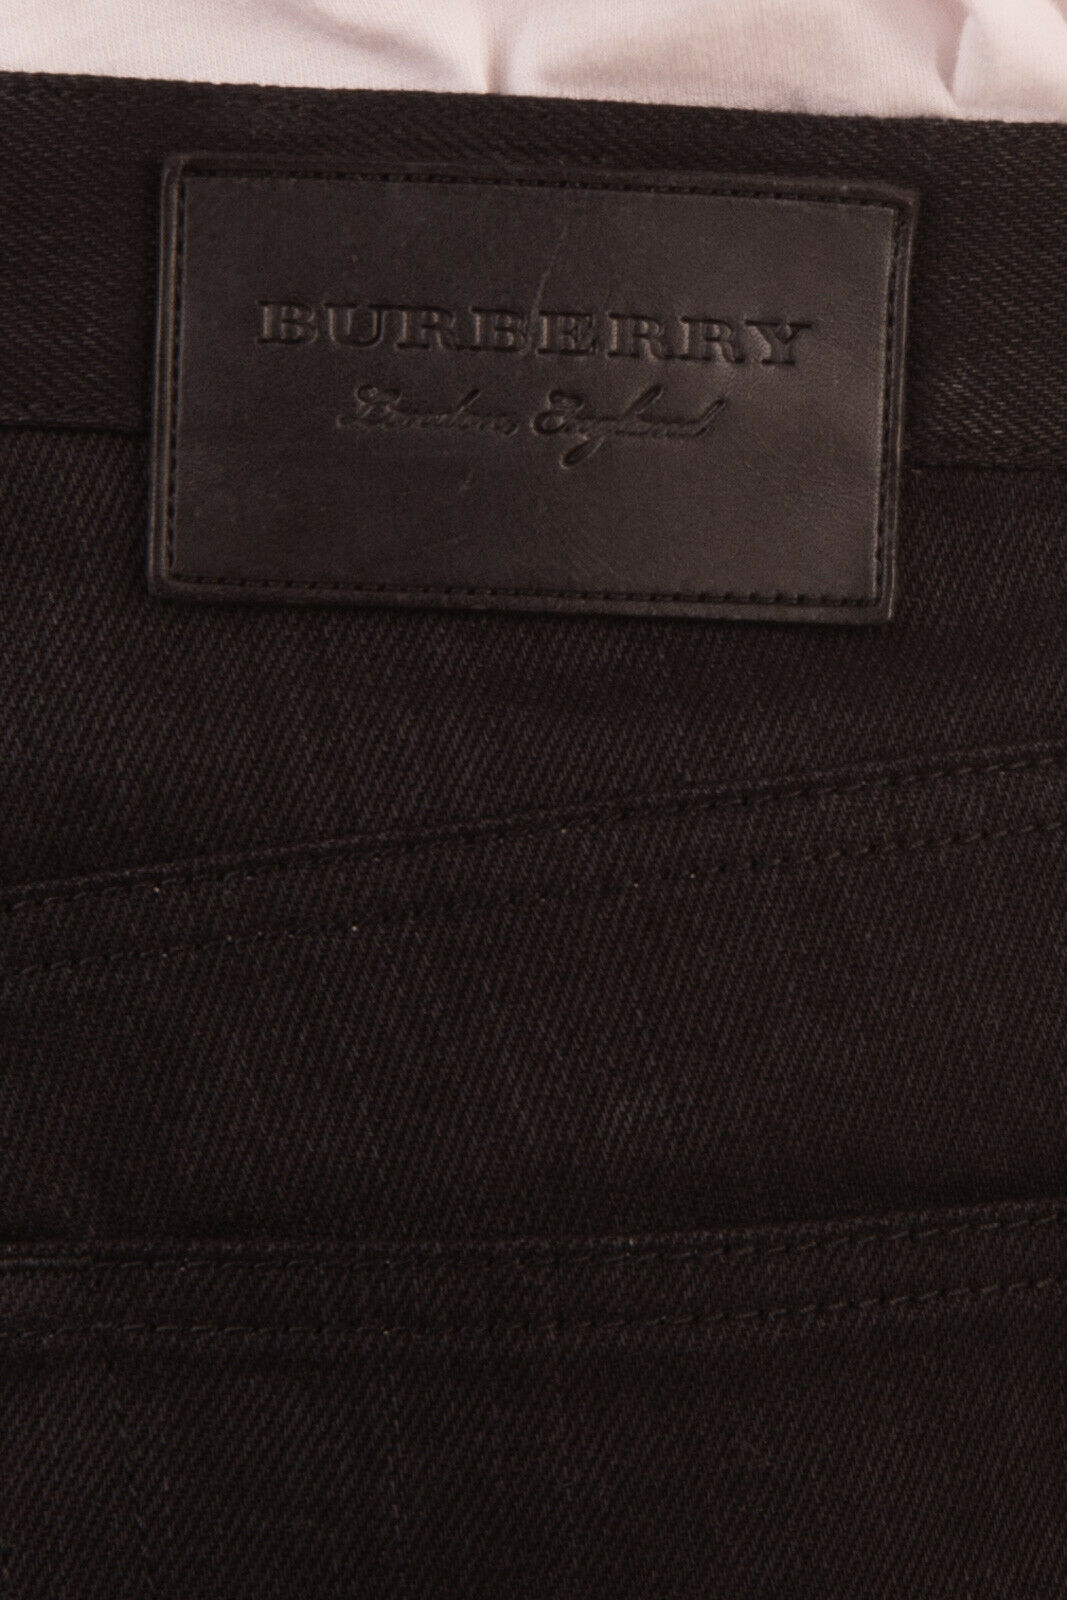 BURBERRY Jeans Size 34 Made in Italy